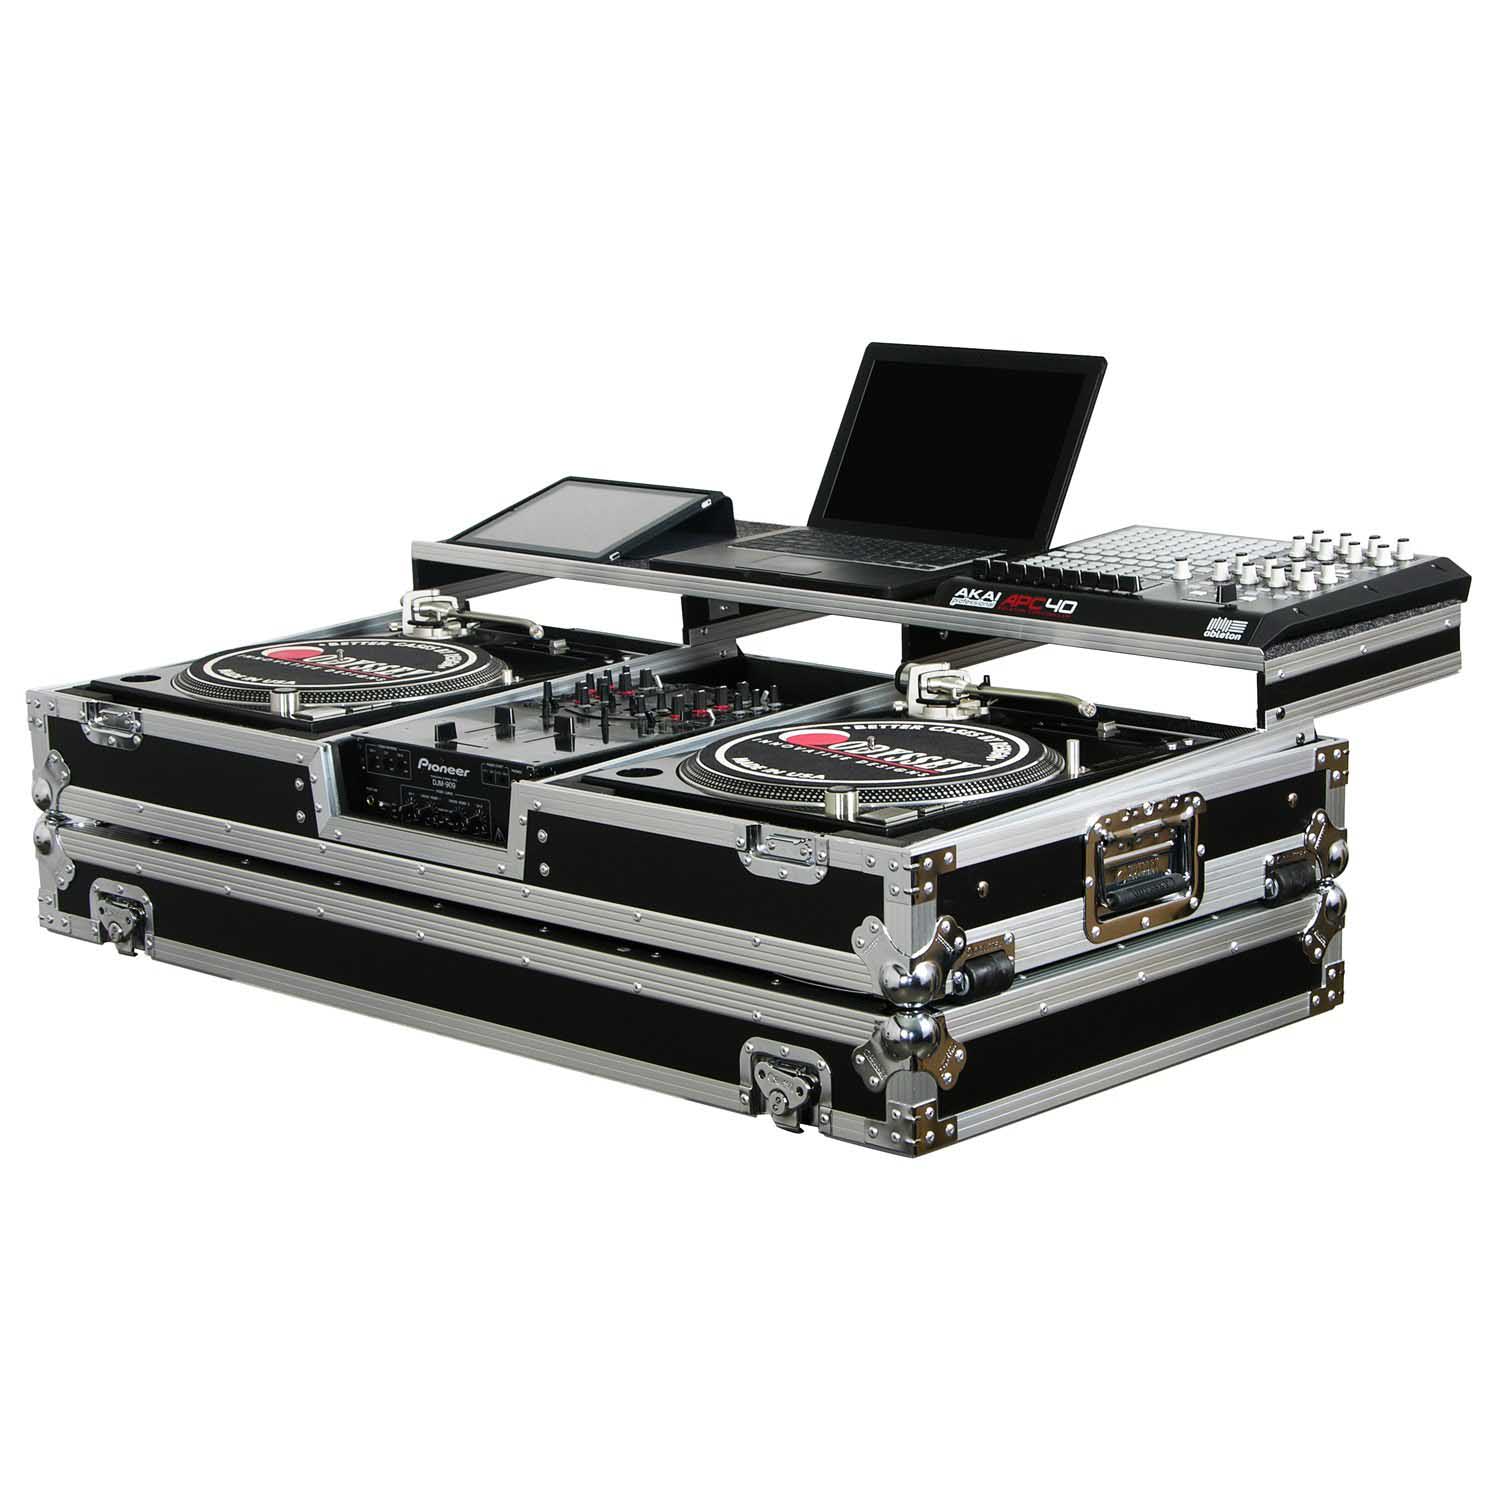 Odyssey FZGSPBM10W Universal 10″ Format DJ Mixer and Two Battle Position Turntables Flight Coffin Case with Full Glide Platform - Hollywood DJ